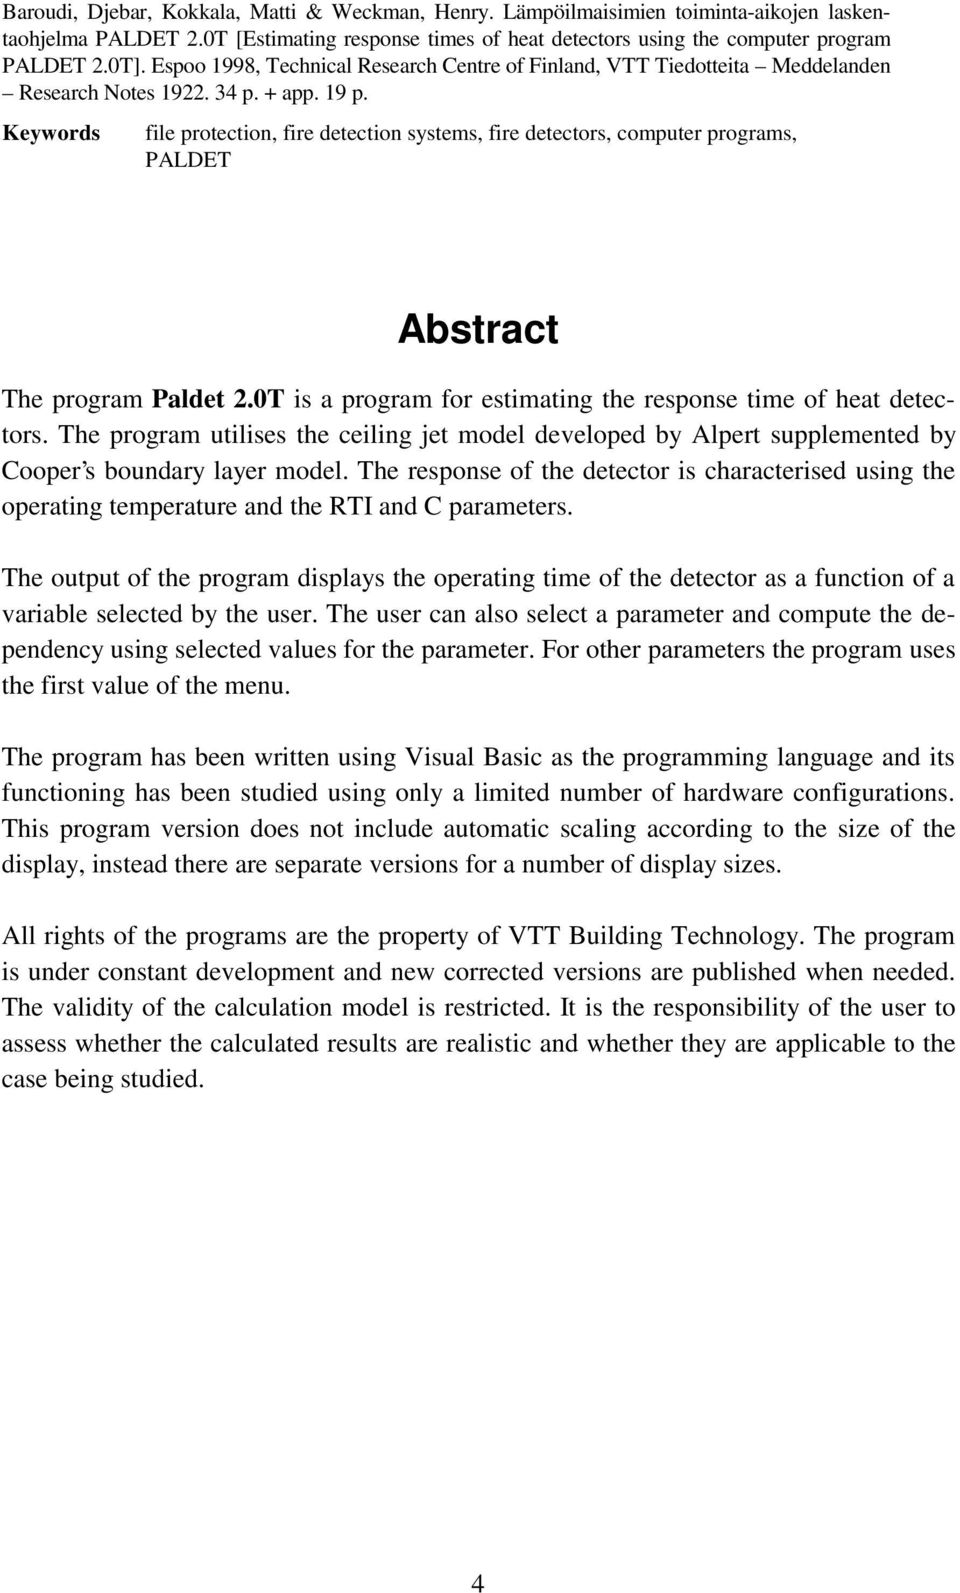 Keywords file protection, fire detection systems, fire detectors, computer programs, PALDET Abstract The program Paldet 2.0T is a program for estimating the response time of heat detectors.